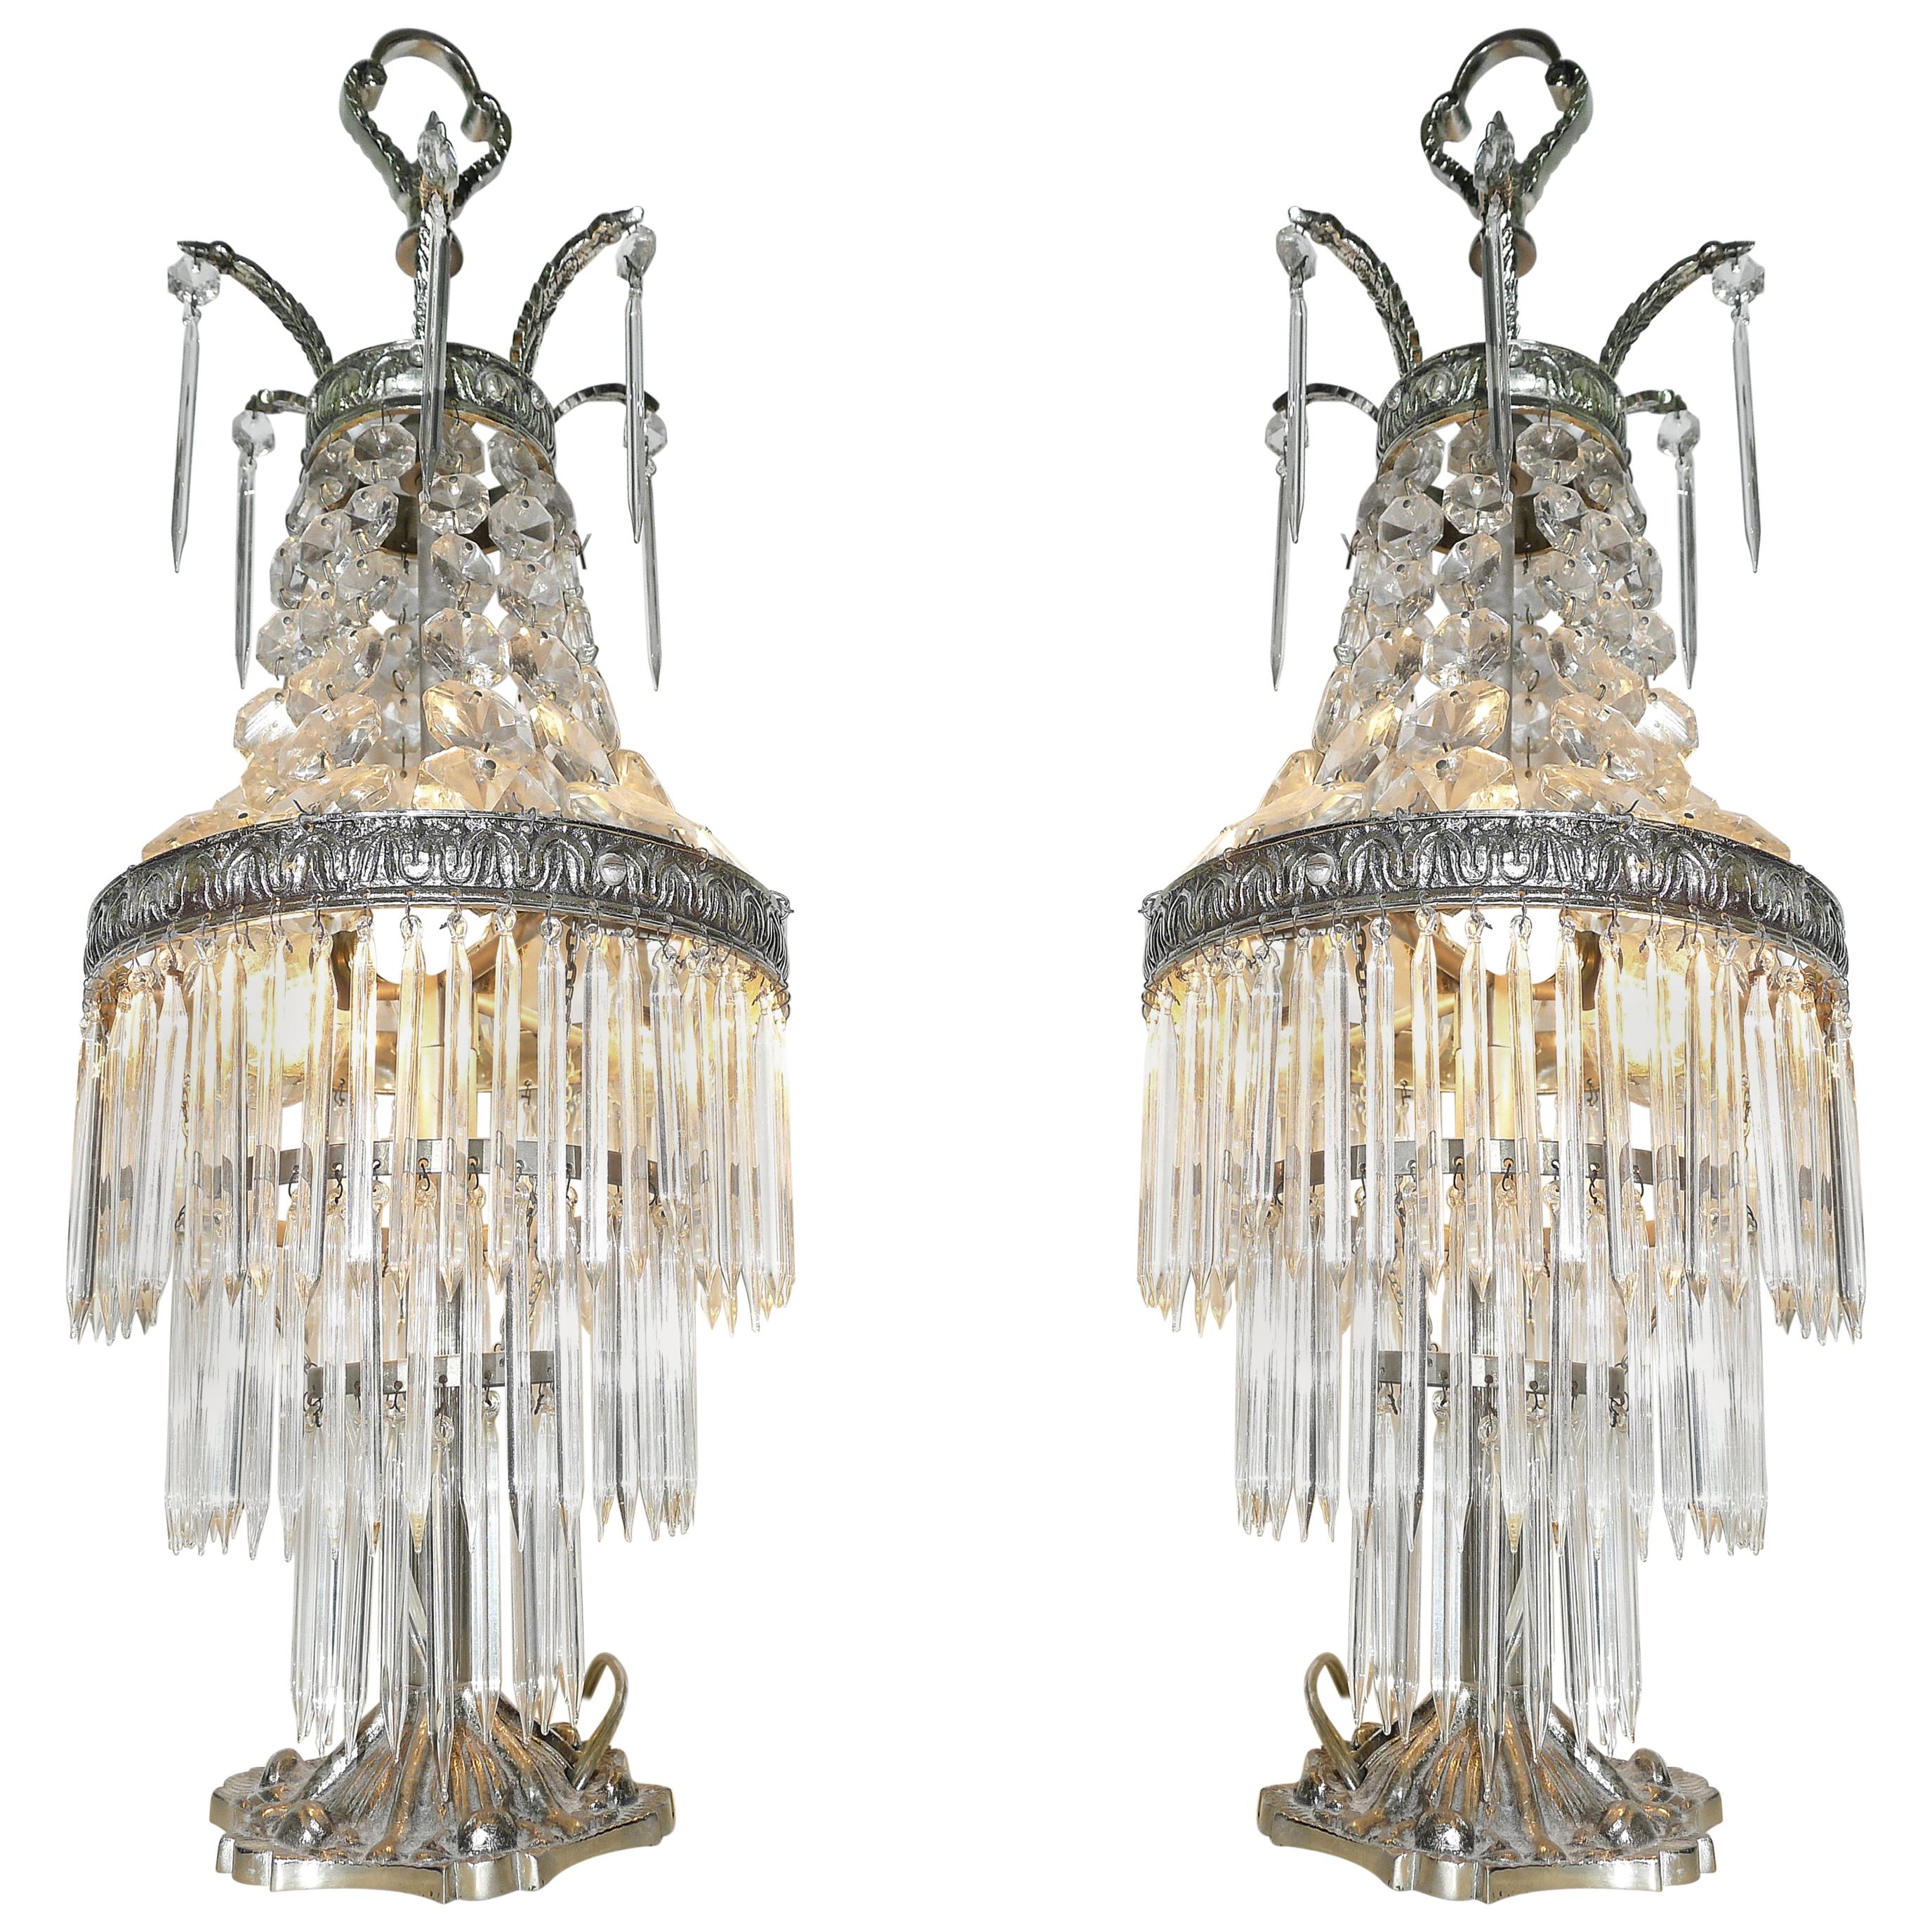 Pair of French Hollywood Regency Empire in Silver Nickel and Crystal Table Lamps